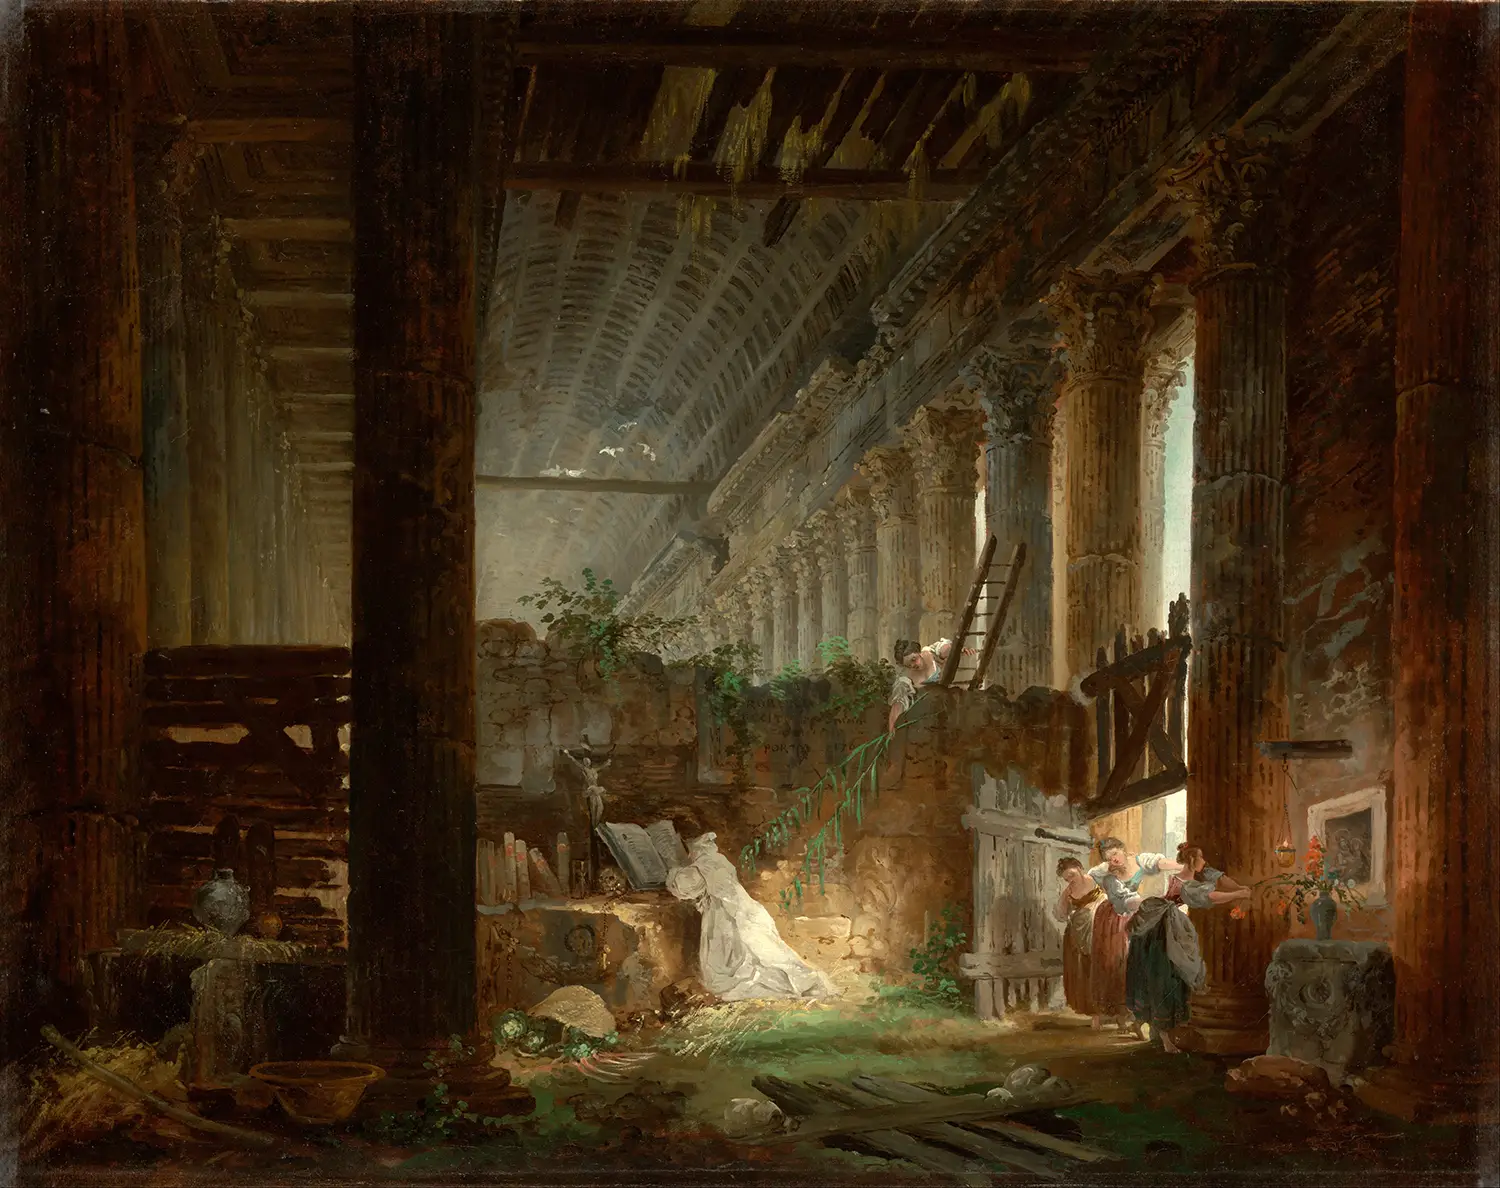 A vast, once opulent Roman temple, is now seen in a state of decay, populated by plants, roosting birds, and a hermit who is praying at a makeshift altar. Behind him, three women are sneaking to steal his flowers. The painting evokes the feeling of a once great civilization now lost to time.